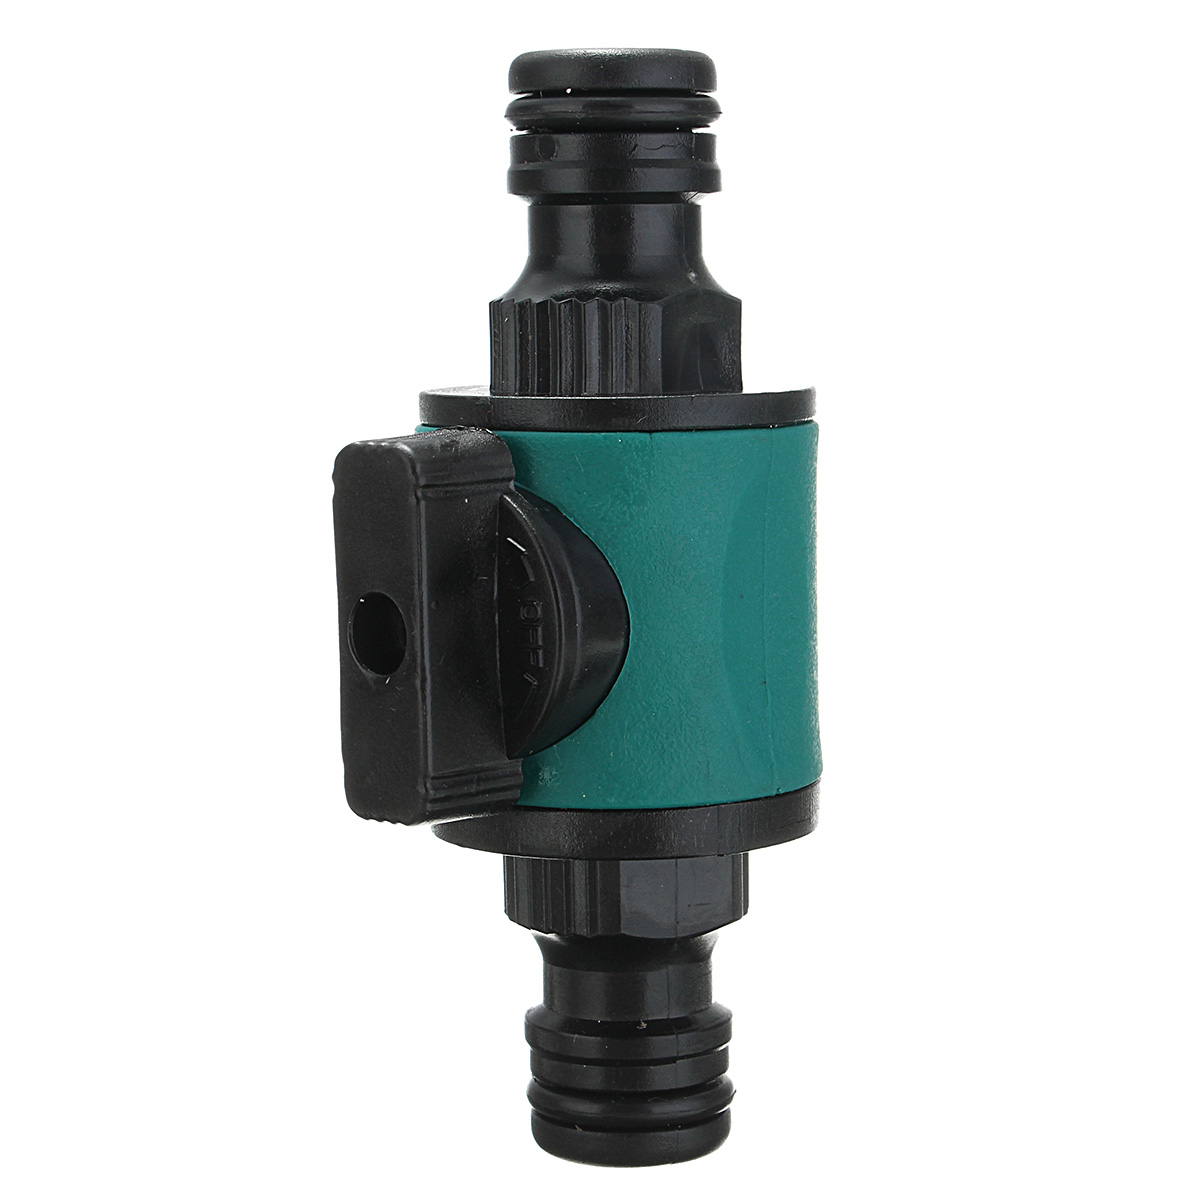 Garden-Hose-Tap-Pipe-Compatible-12-2-Way-Connector-Valve-Convertor-Fitting-Adapter-Tool-1290232-6